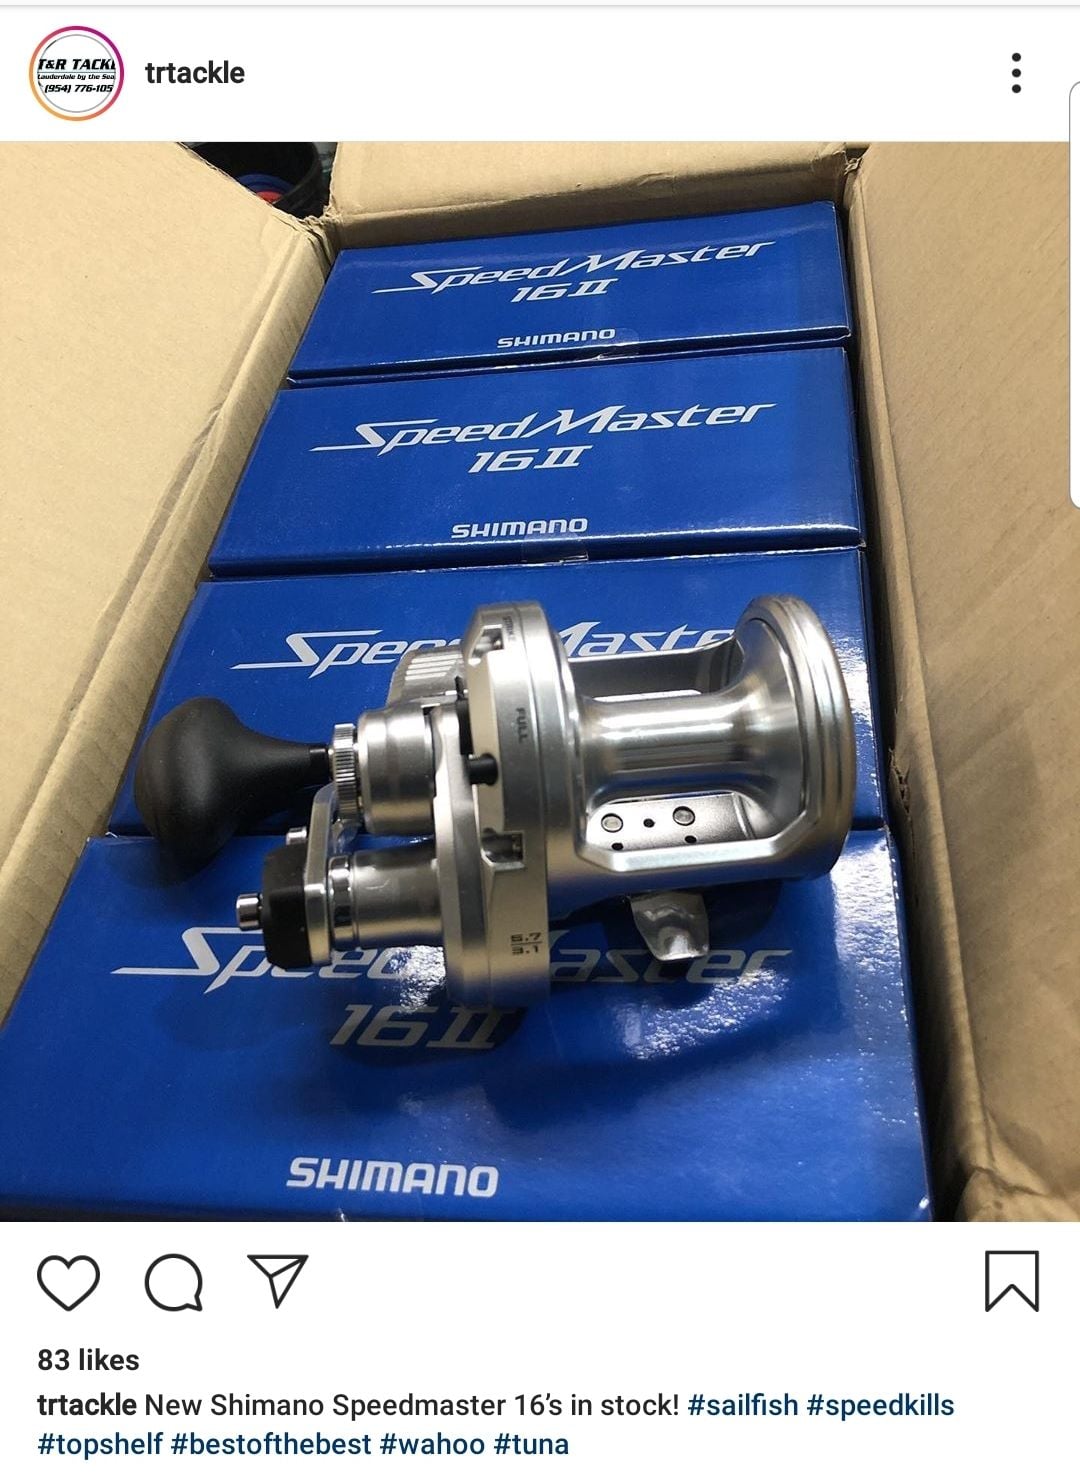 Shimano's New Speedmaster? - The Hull Truth - Boating and Fishing